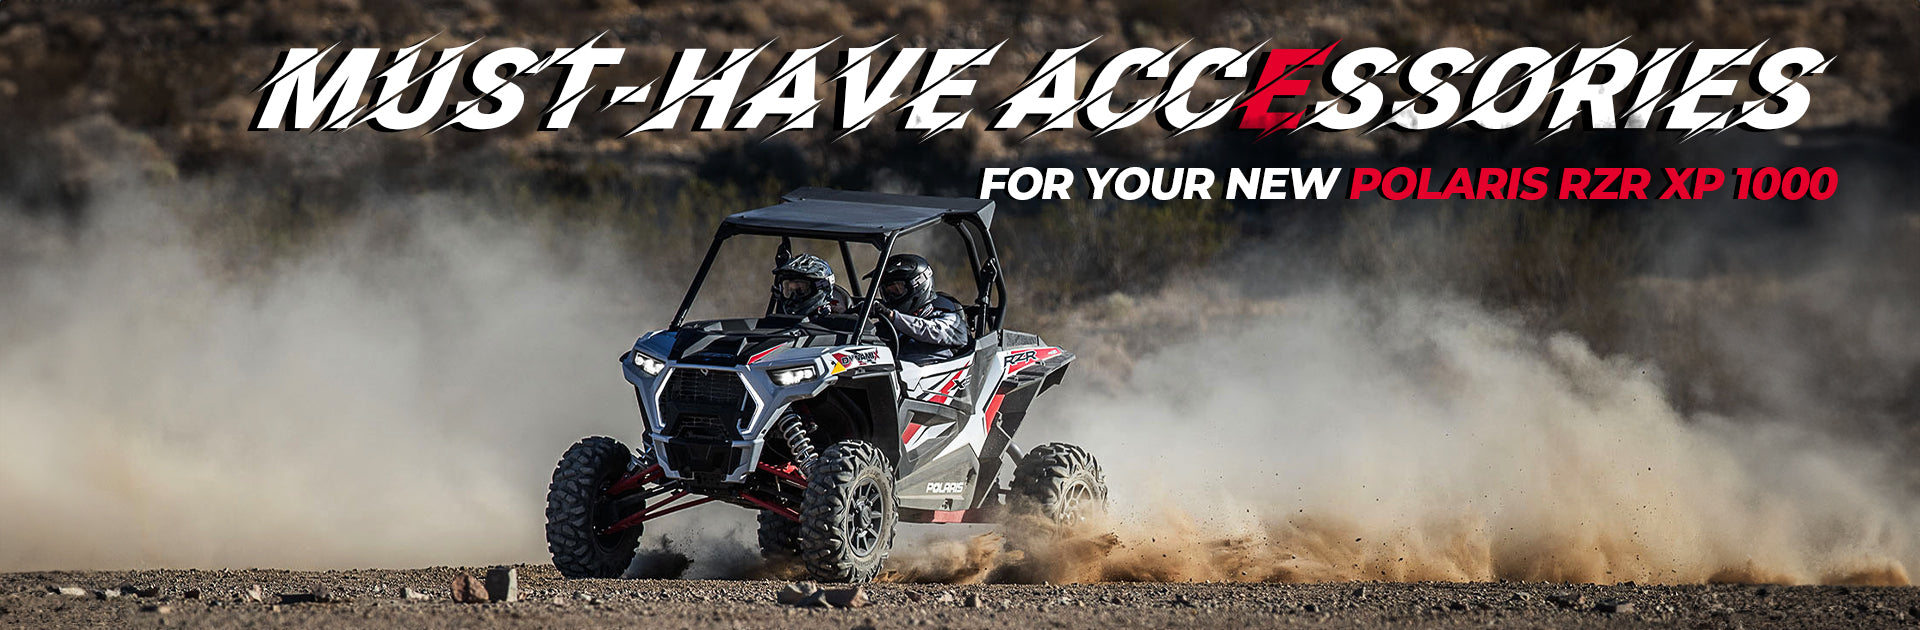 Kemimoto TOP 10 MUST-HAVE RZR XP 1000 ACCESSORIES